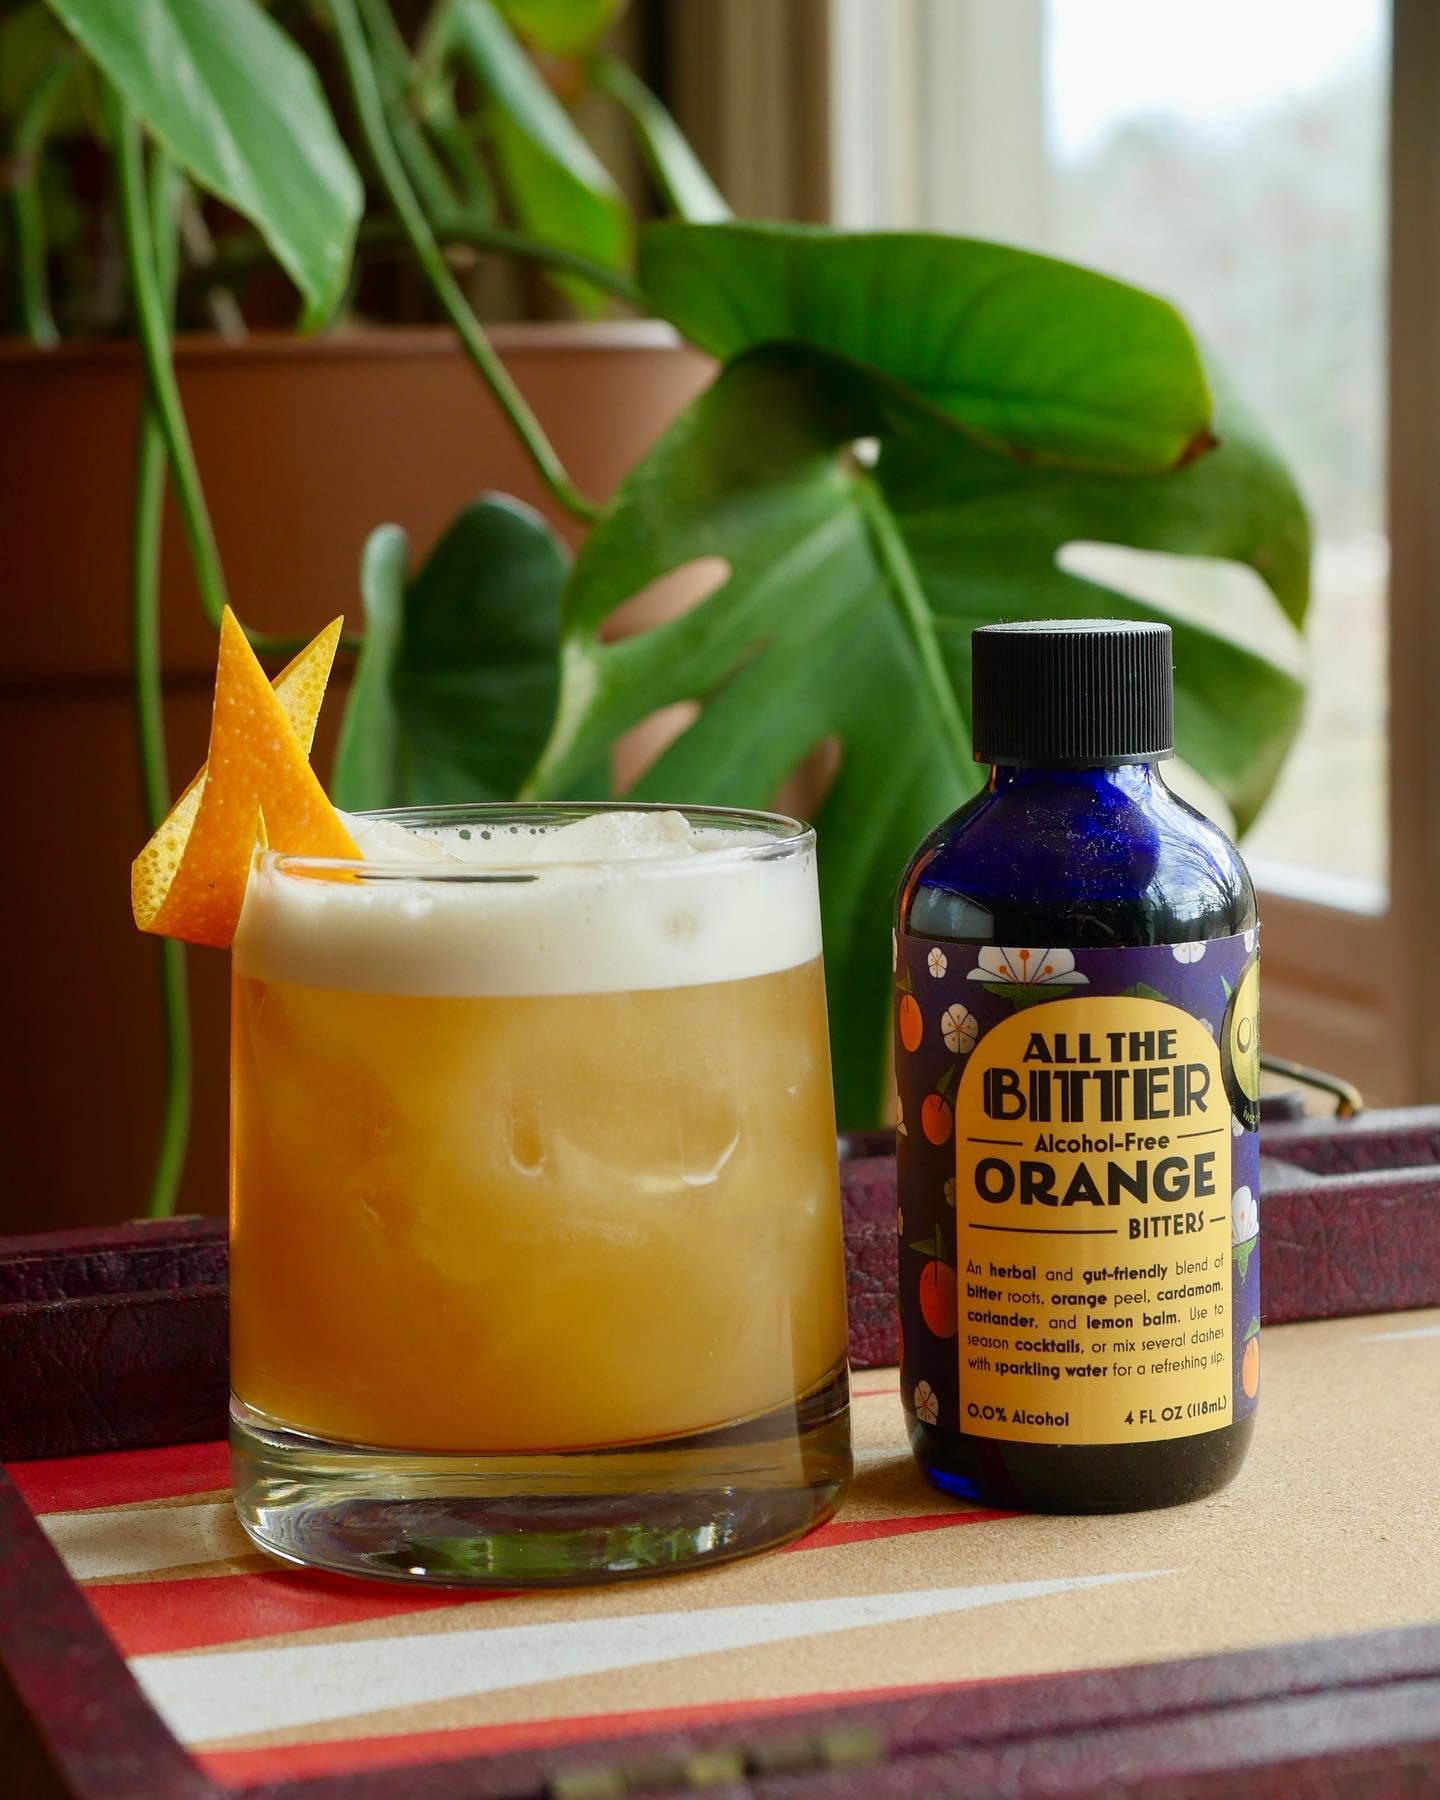 Happy Hump Day!

Introducing &ldquo;Dimes, Limes &amp; Uncertain Times&rdquo;!

This delicious, yet easy to make elixir cocktail is full of flavor, thanks in part to our friends @allthebitter!

As always the recipe is live on our website under &ldquo